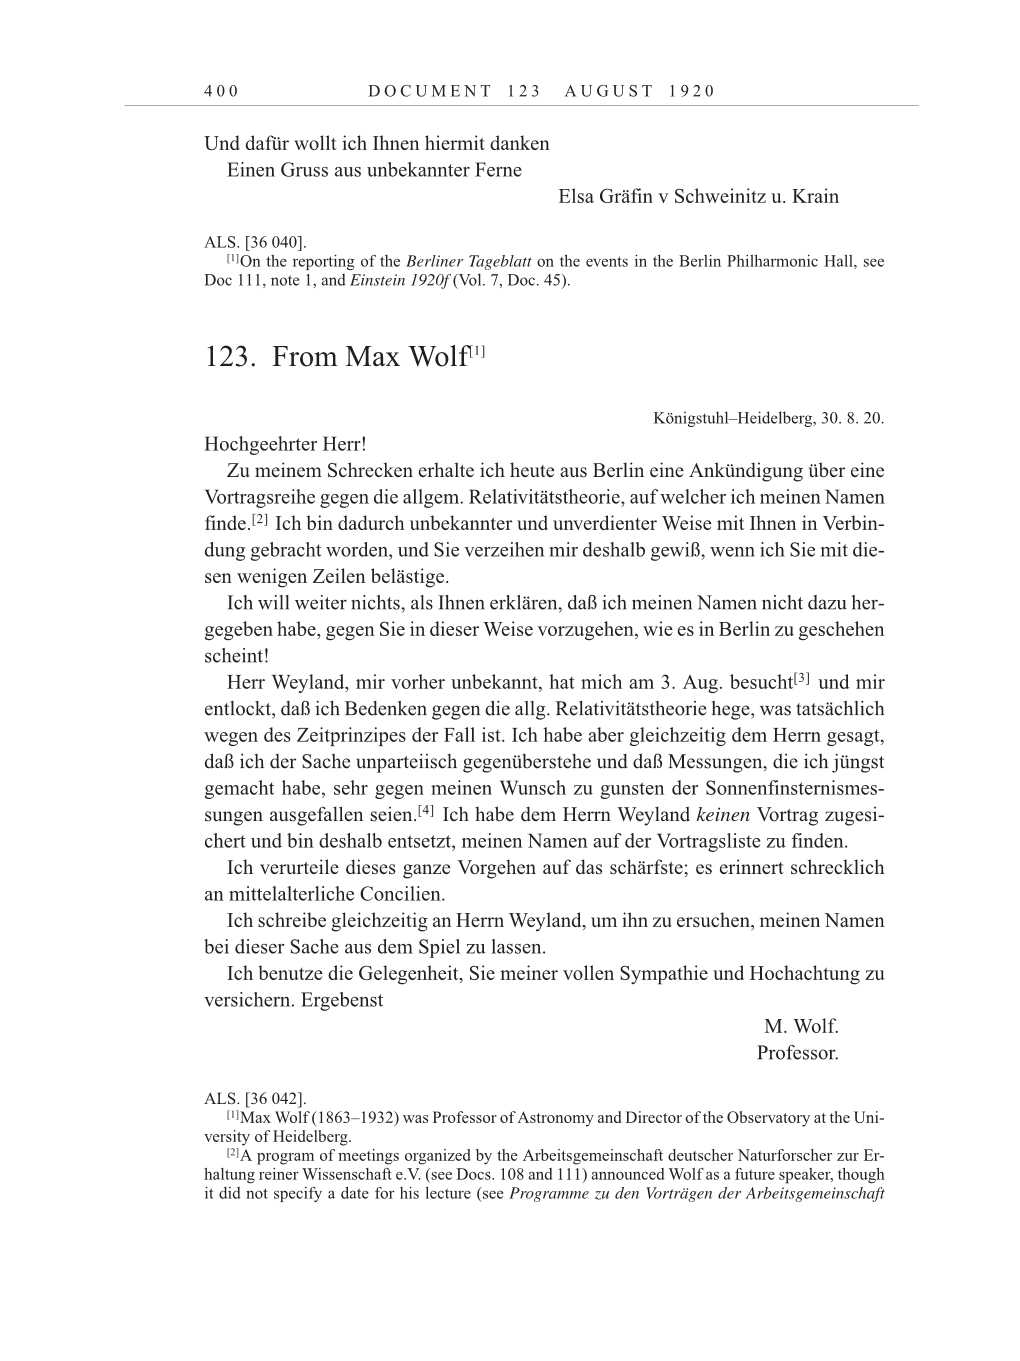 Volume 10: The Berlin Years: Correspondence May-December 1920 / Supplementary Correspondence 1909-1920 page 400